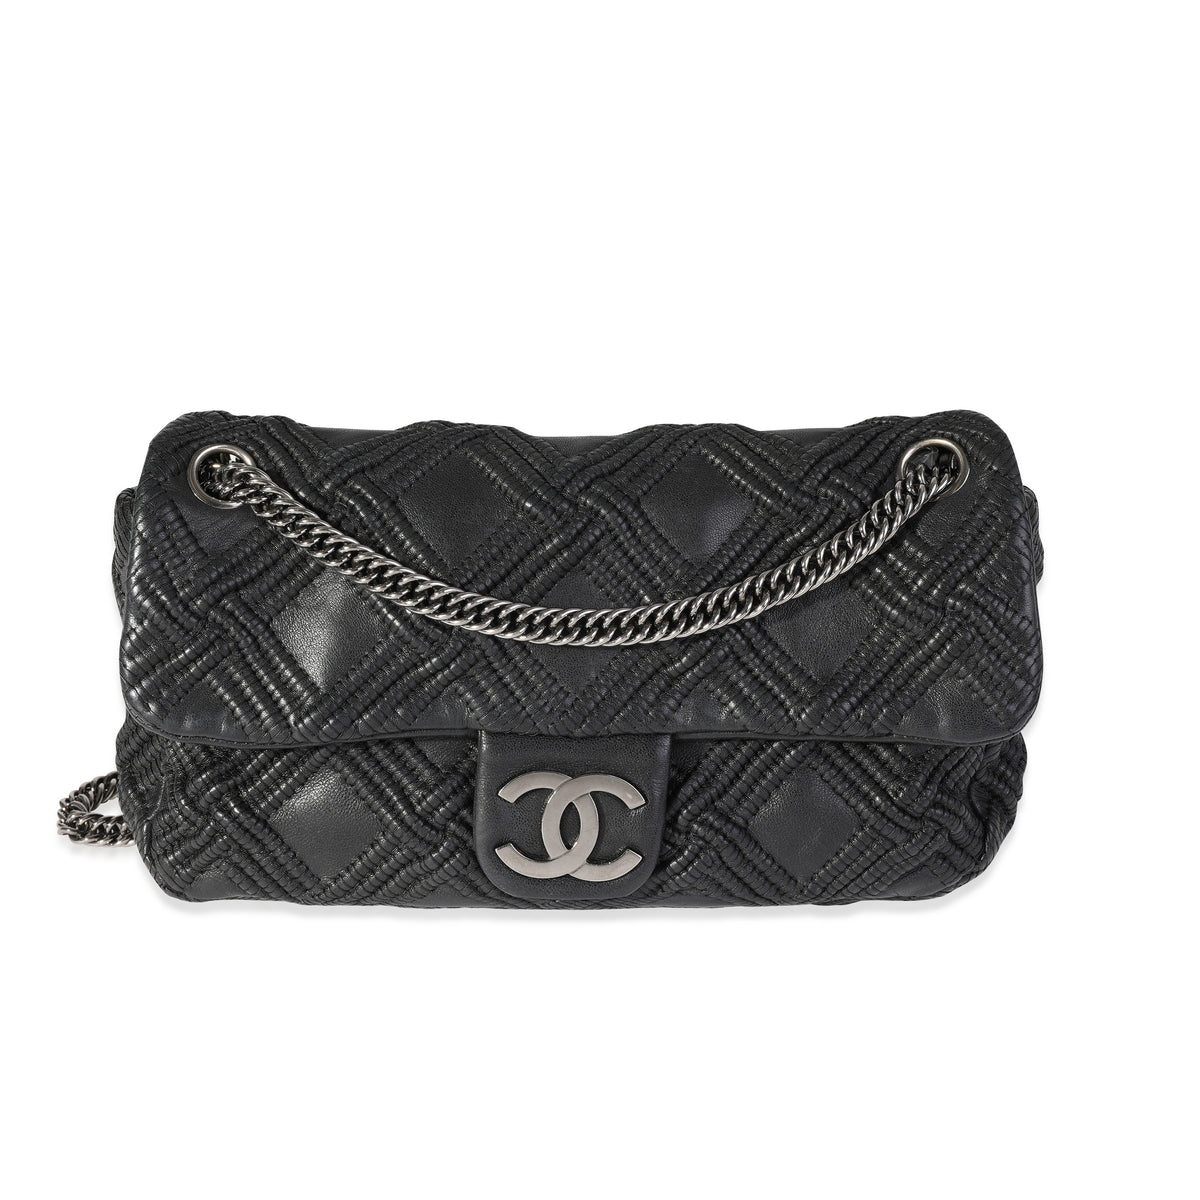 CHANEL Pre-Owned 2008-2009 heart-charm Classic Flap Mini Shoulder